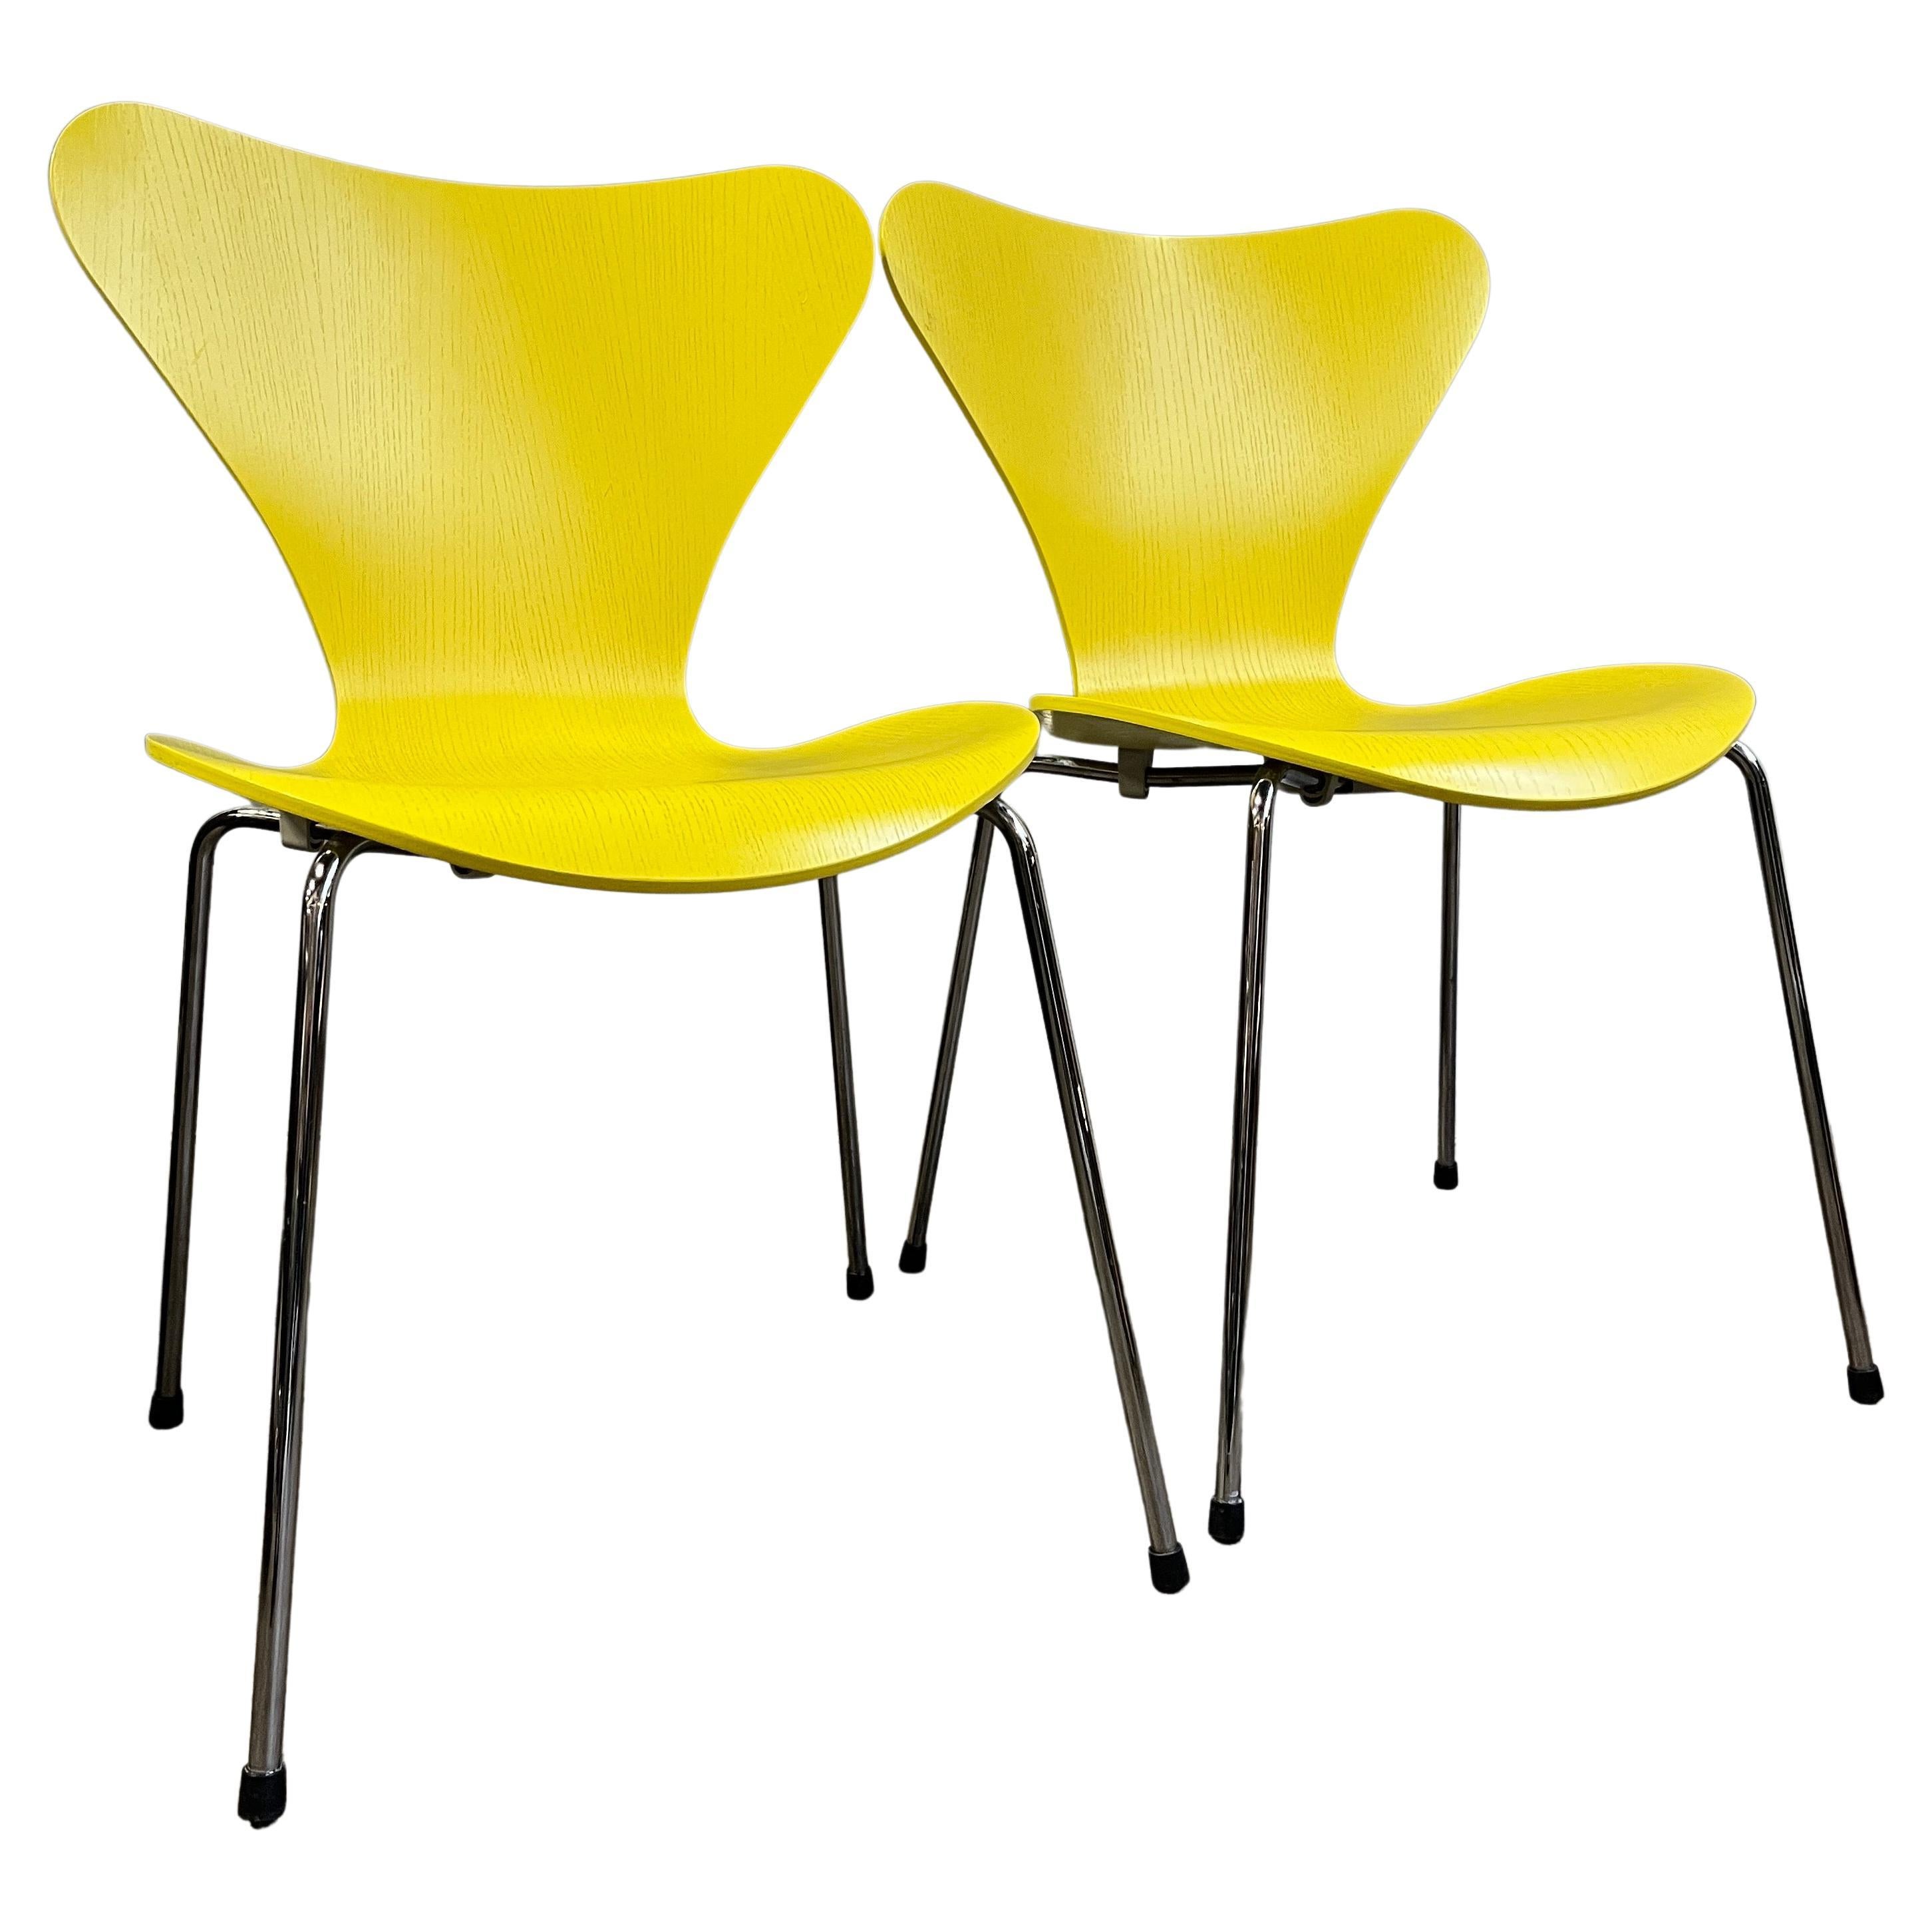 Pair of yellow Arne Jacobsen series 7 chairs for Fritz Hansen. No real signs of wear. This iconic design is one of the most successful chairs every produced from this era. Incredibly comfortable as versatile.
 local pickup in Brooklyn, NY is free.